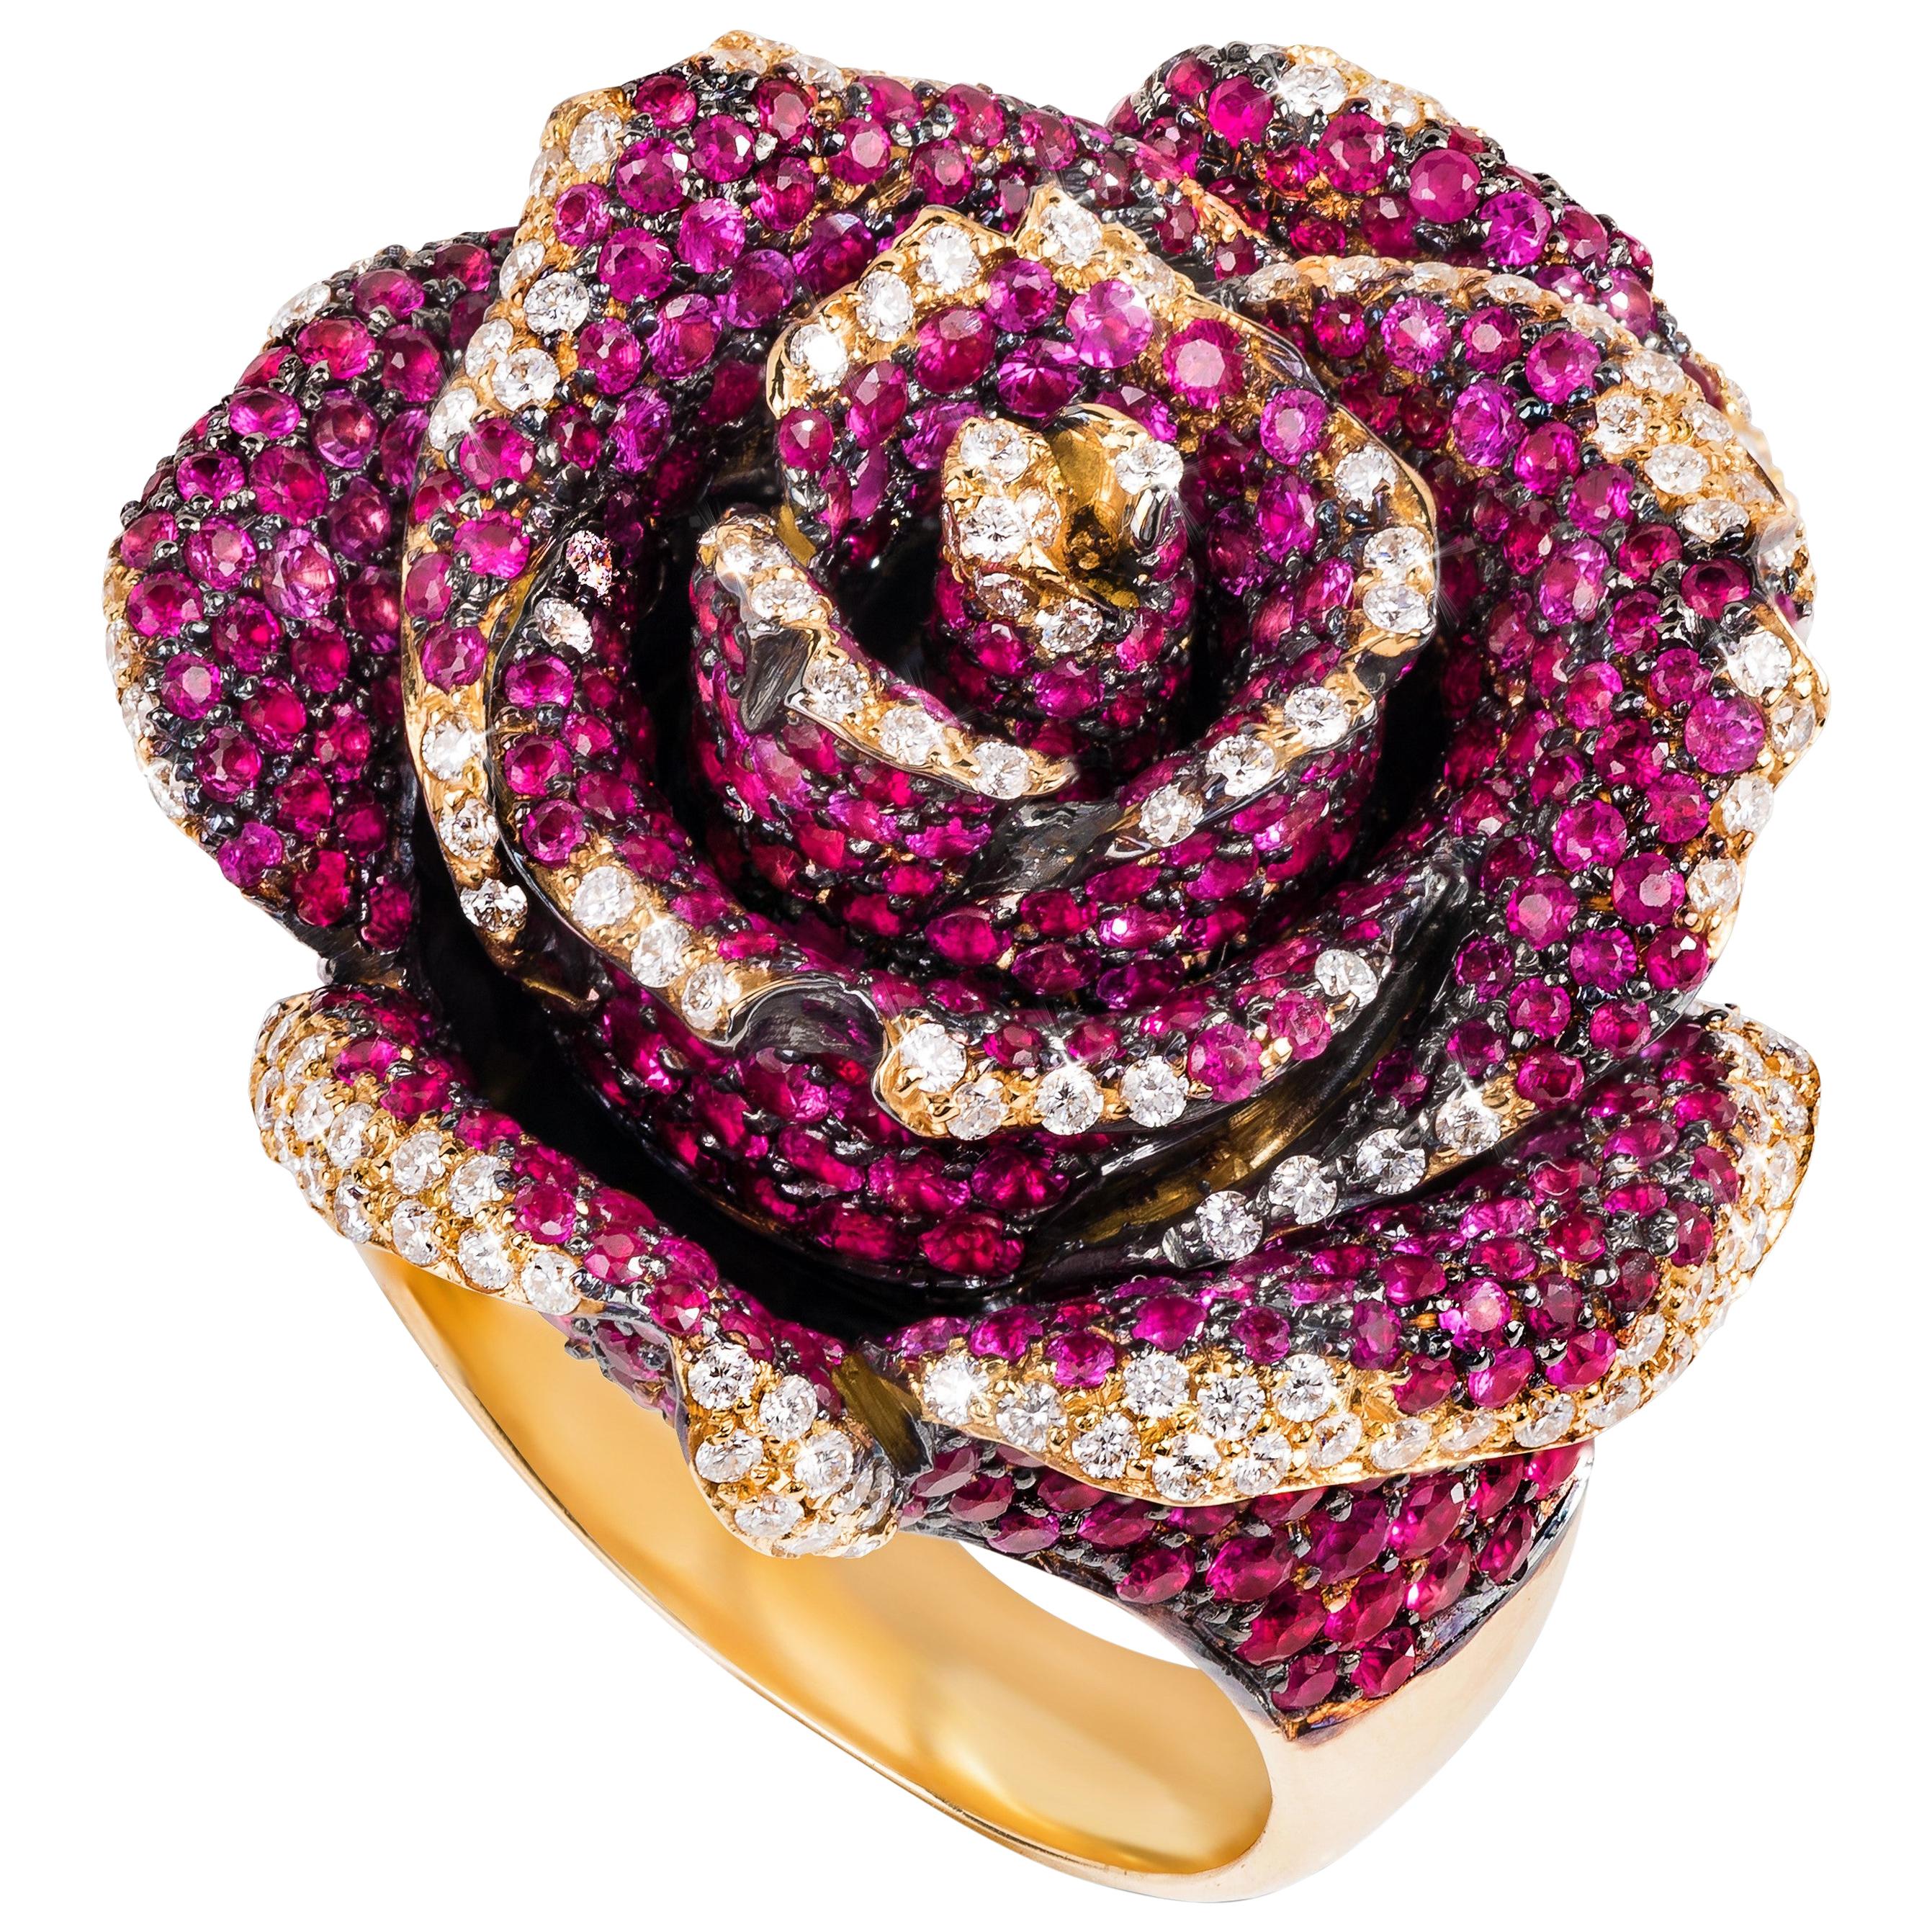 Rosior one-off Ruby, Sapphire and Diamond "Rosebud" Cocktail Ring in Yellow Gold